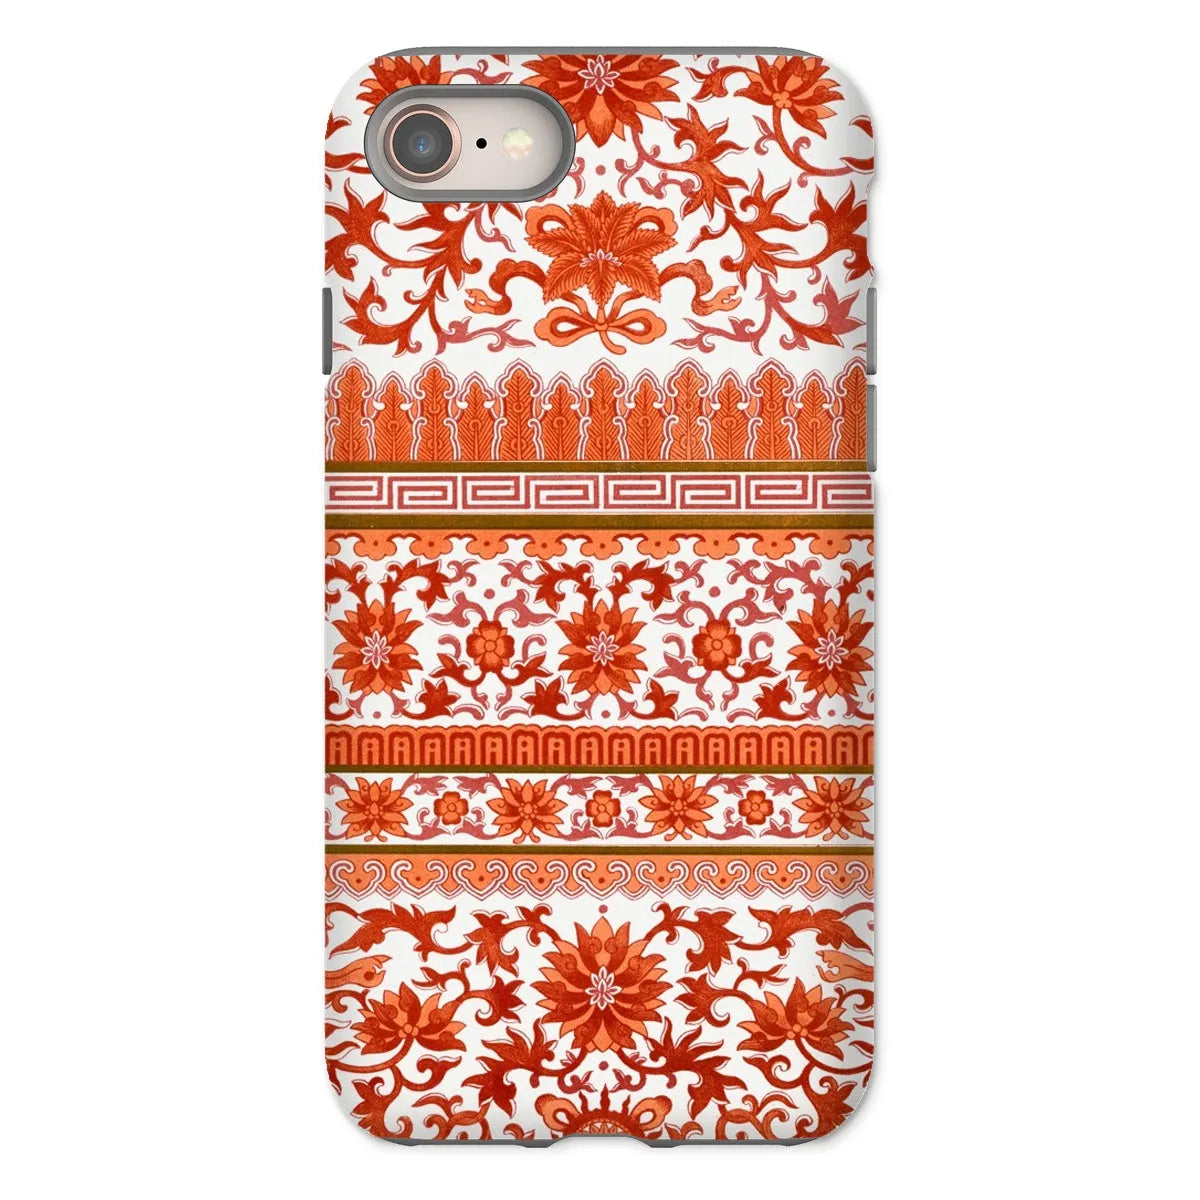 Fiery Chinese Floral Aesthetic Art Phone Case - Owen Jones - Iphone 8 / Matte - Mobile Phone Cases - Aesthetic Art